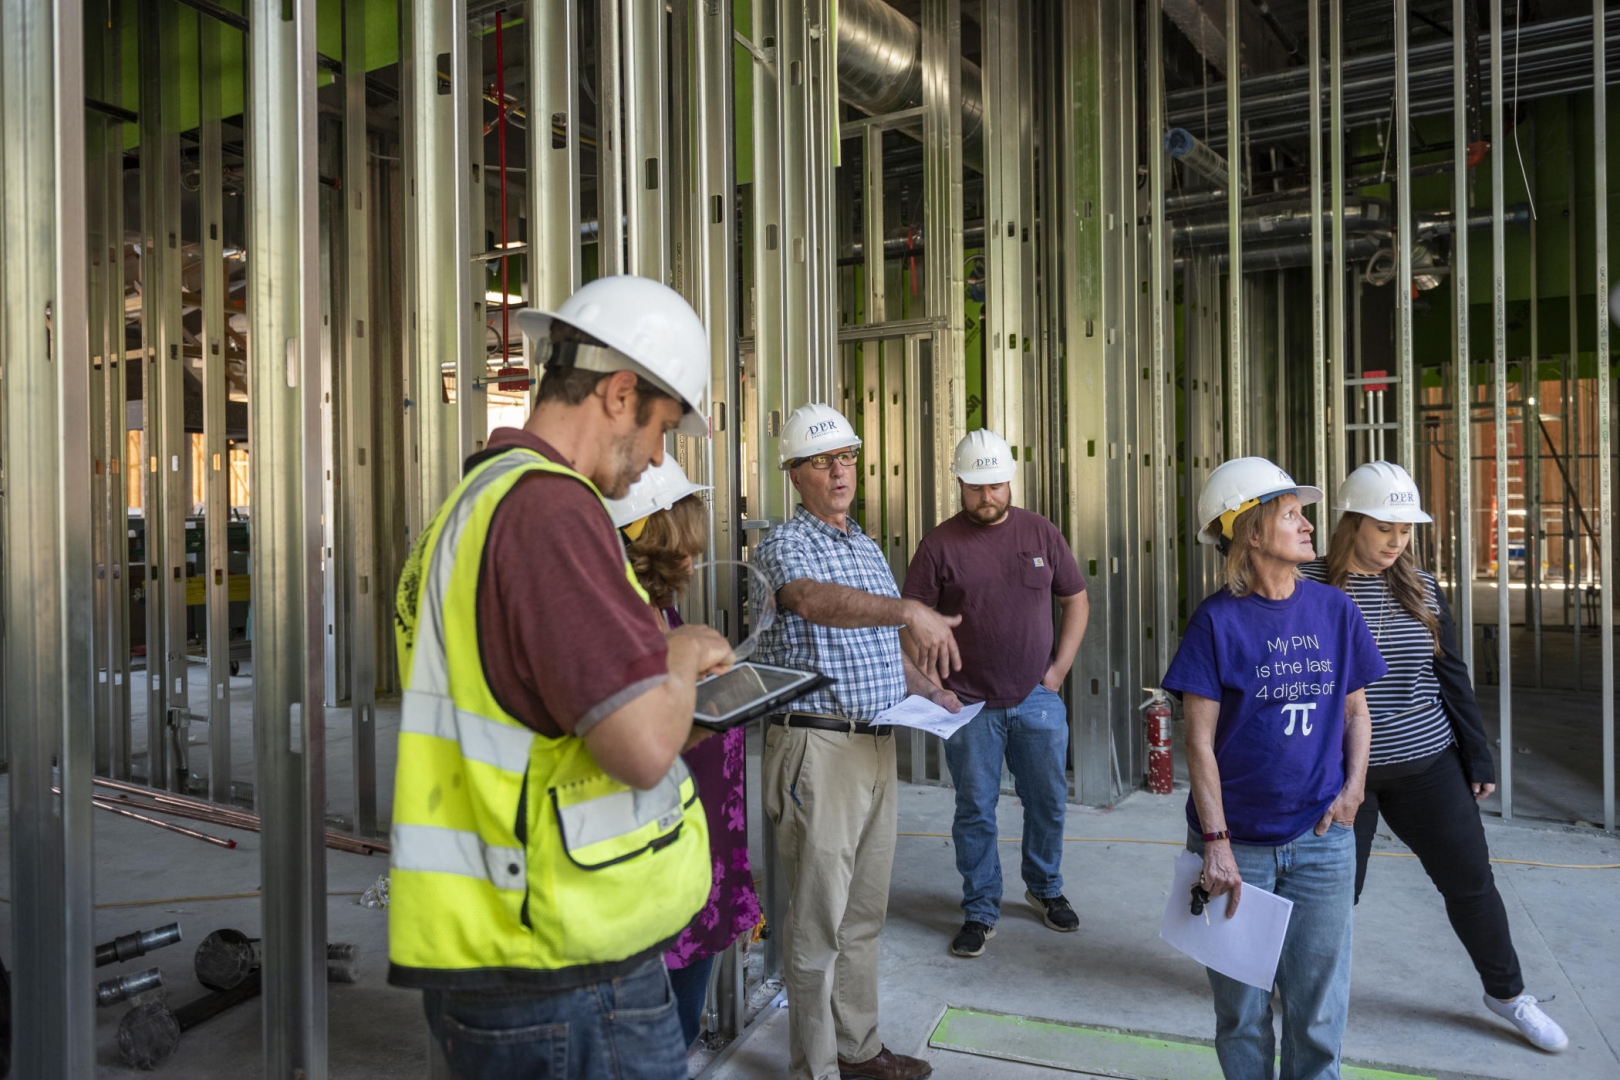 Randy Miller gestures as others in hard hats walk through the interior steel framed walls of the building.